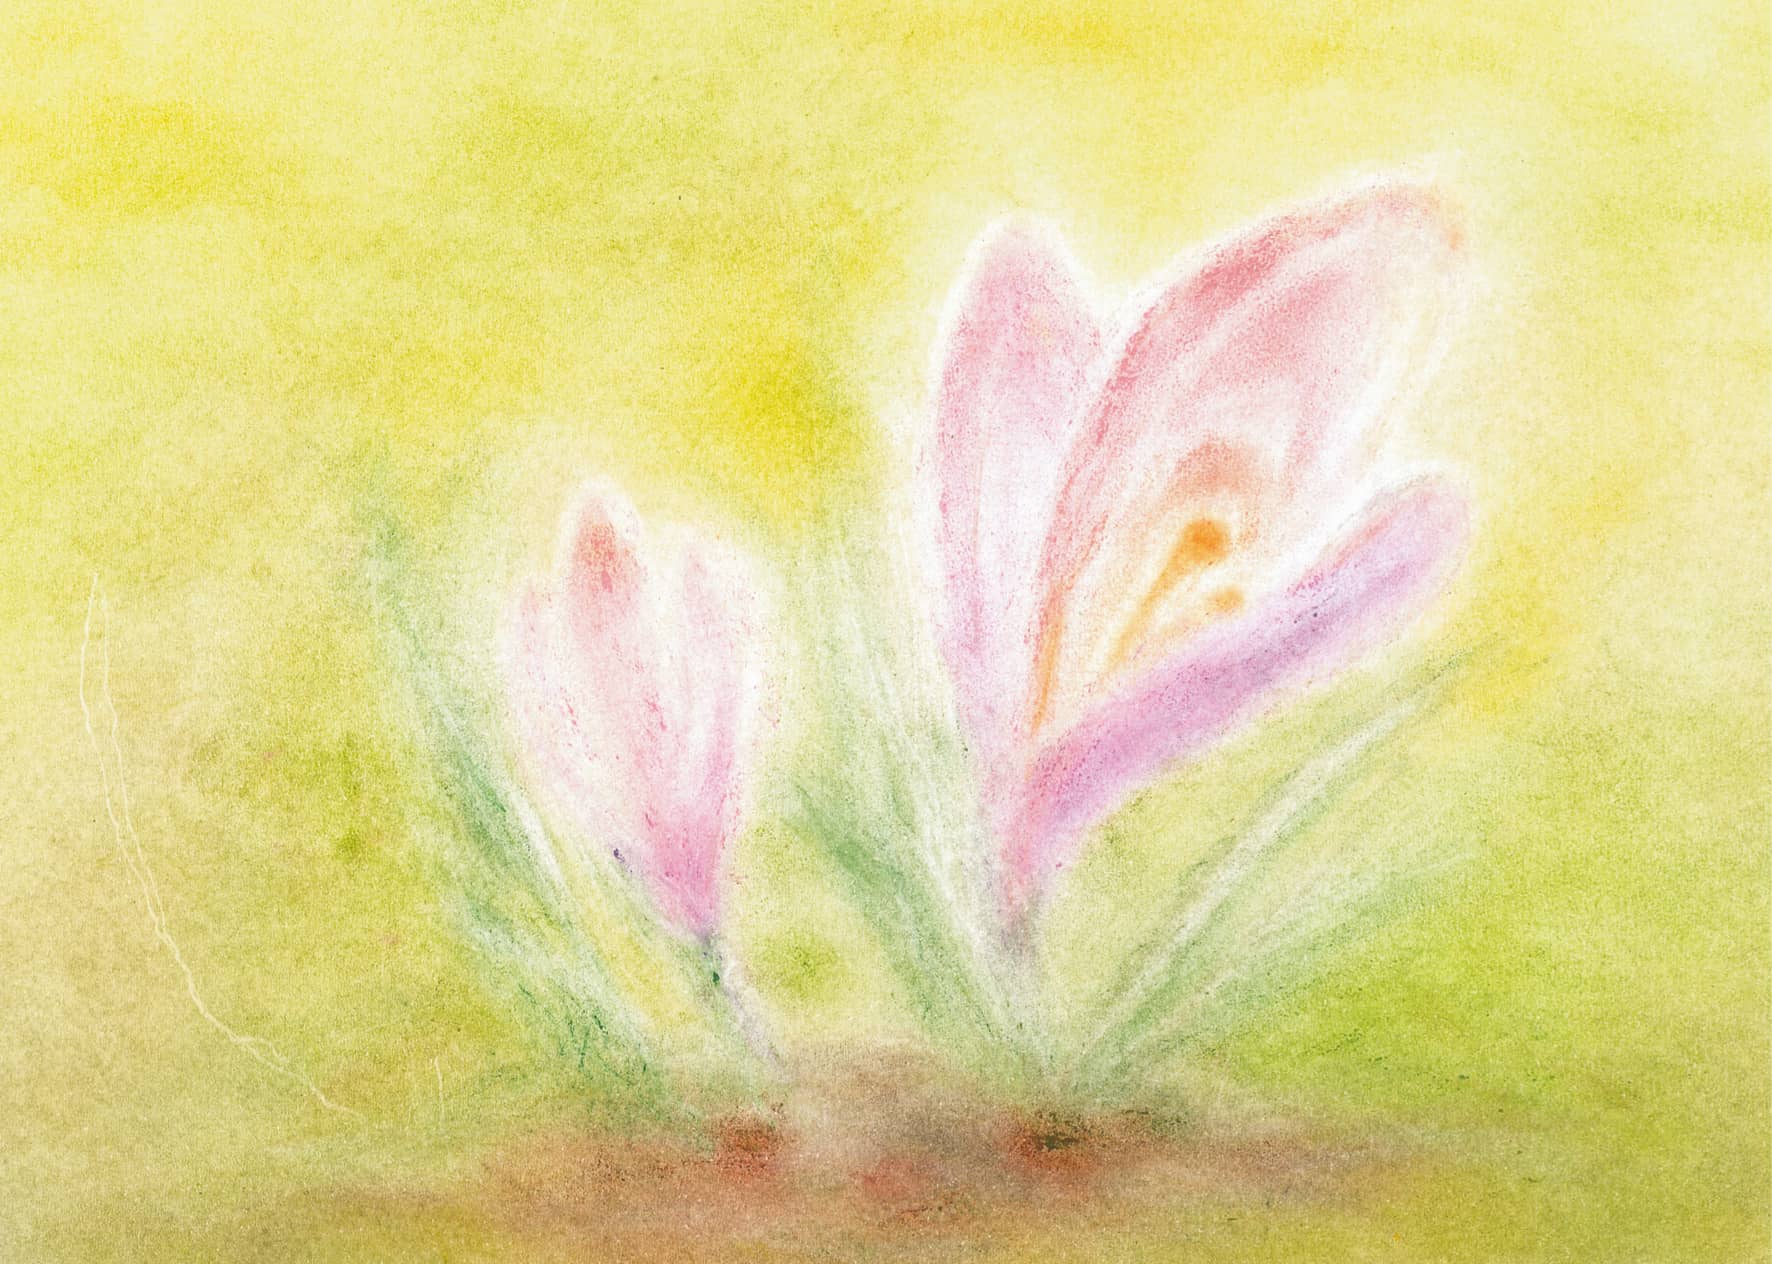 Seccorell postcard "Crocus" shows delicate purple crocus flowers that herald the arrival of spring.